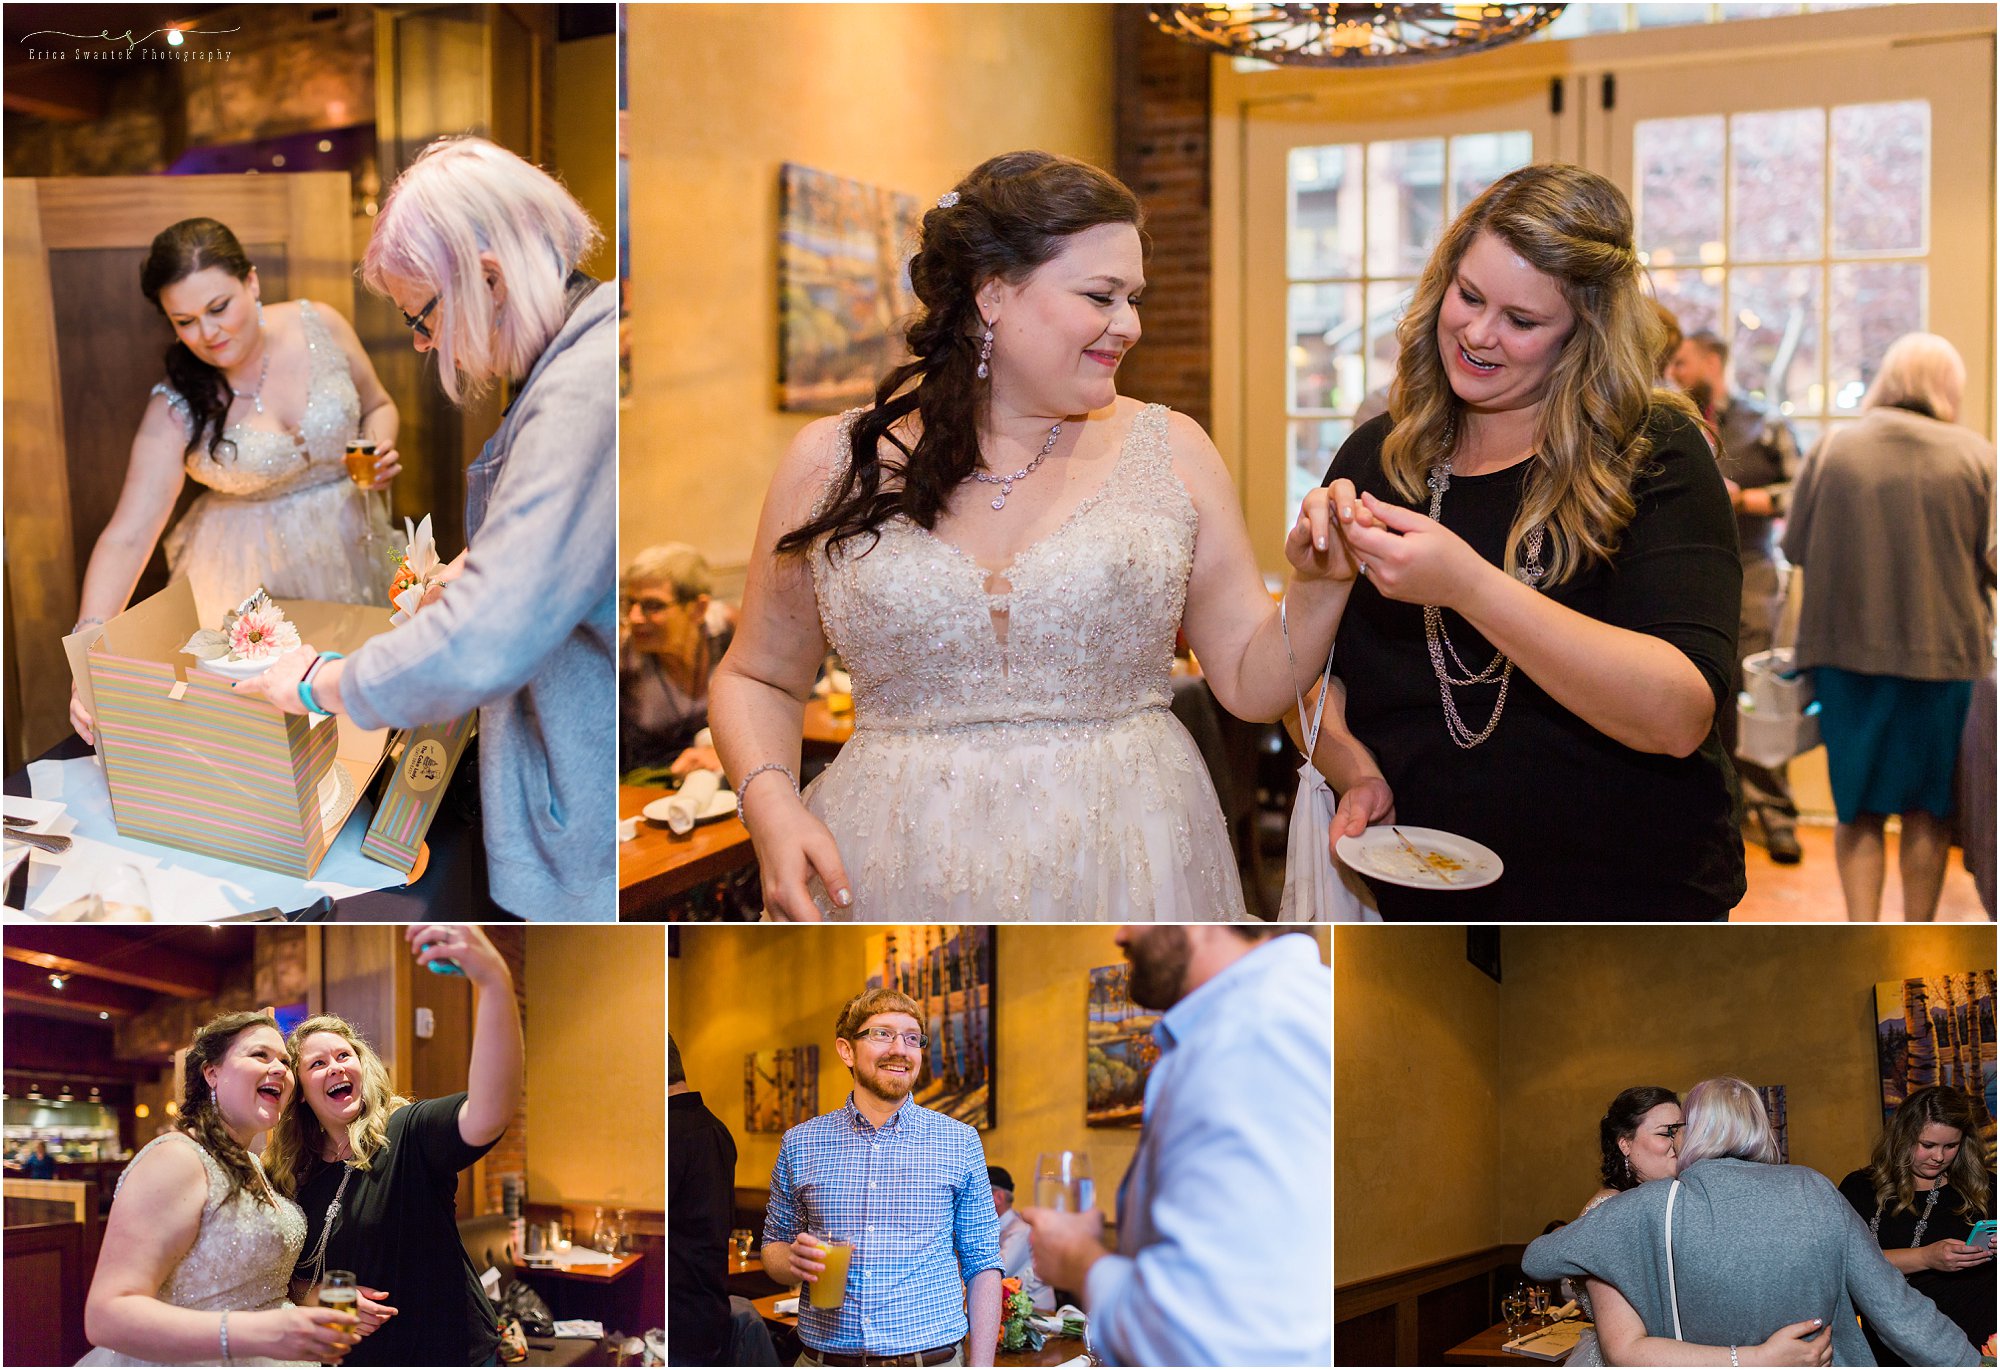 A bride shows off her ring to guests at her intimate Bend, Oregon wedding reception. | Erica Swantek Photography